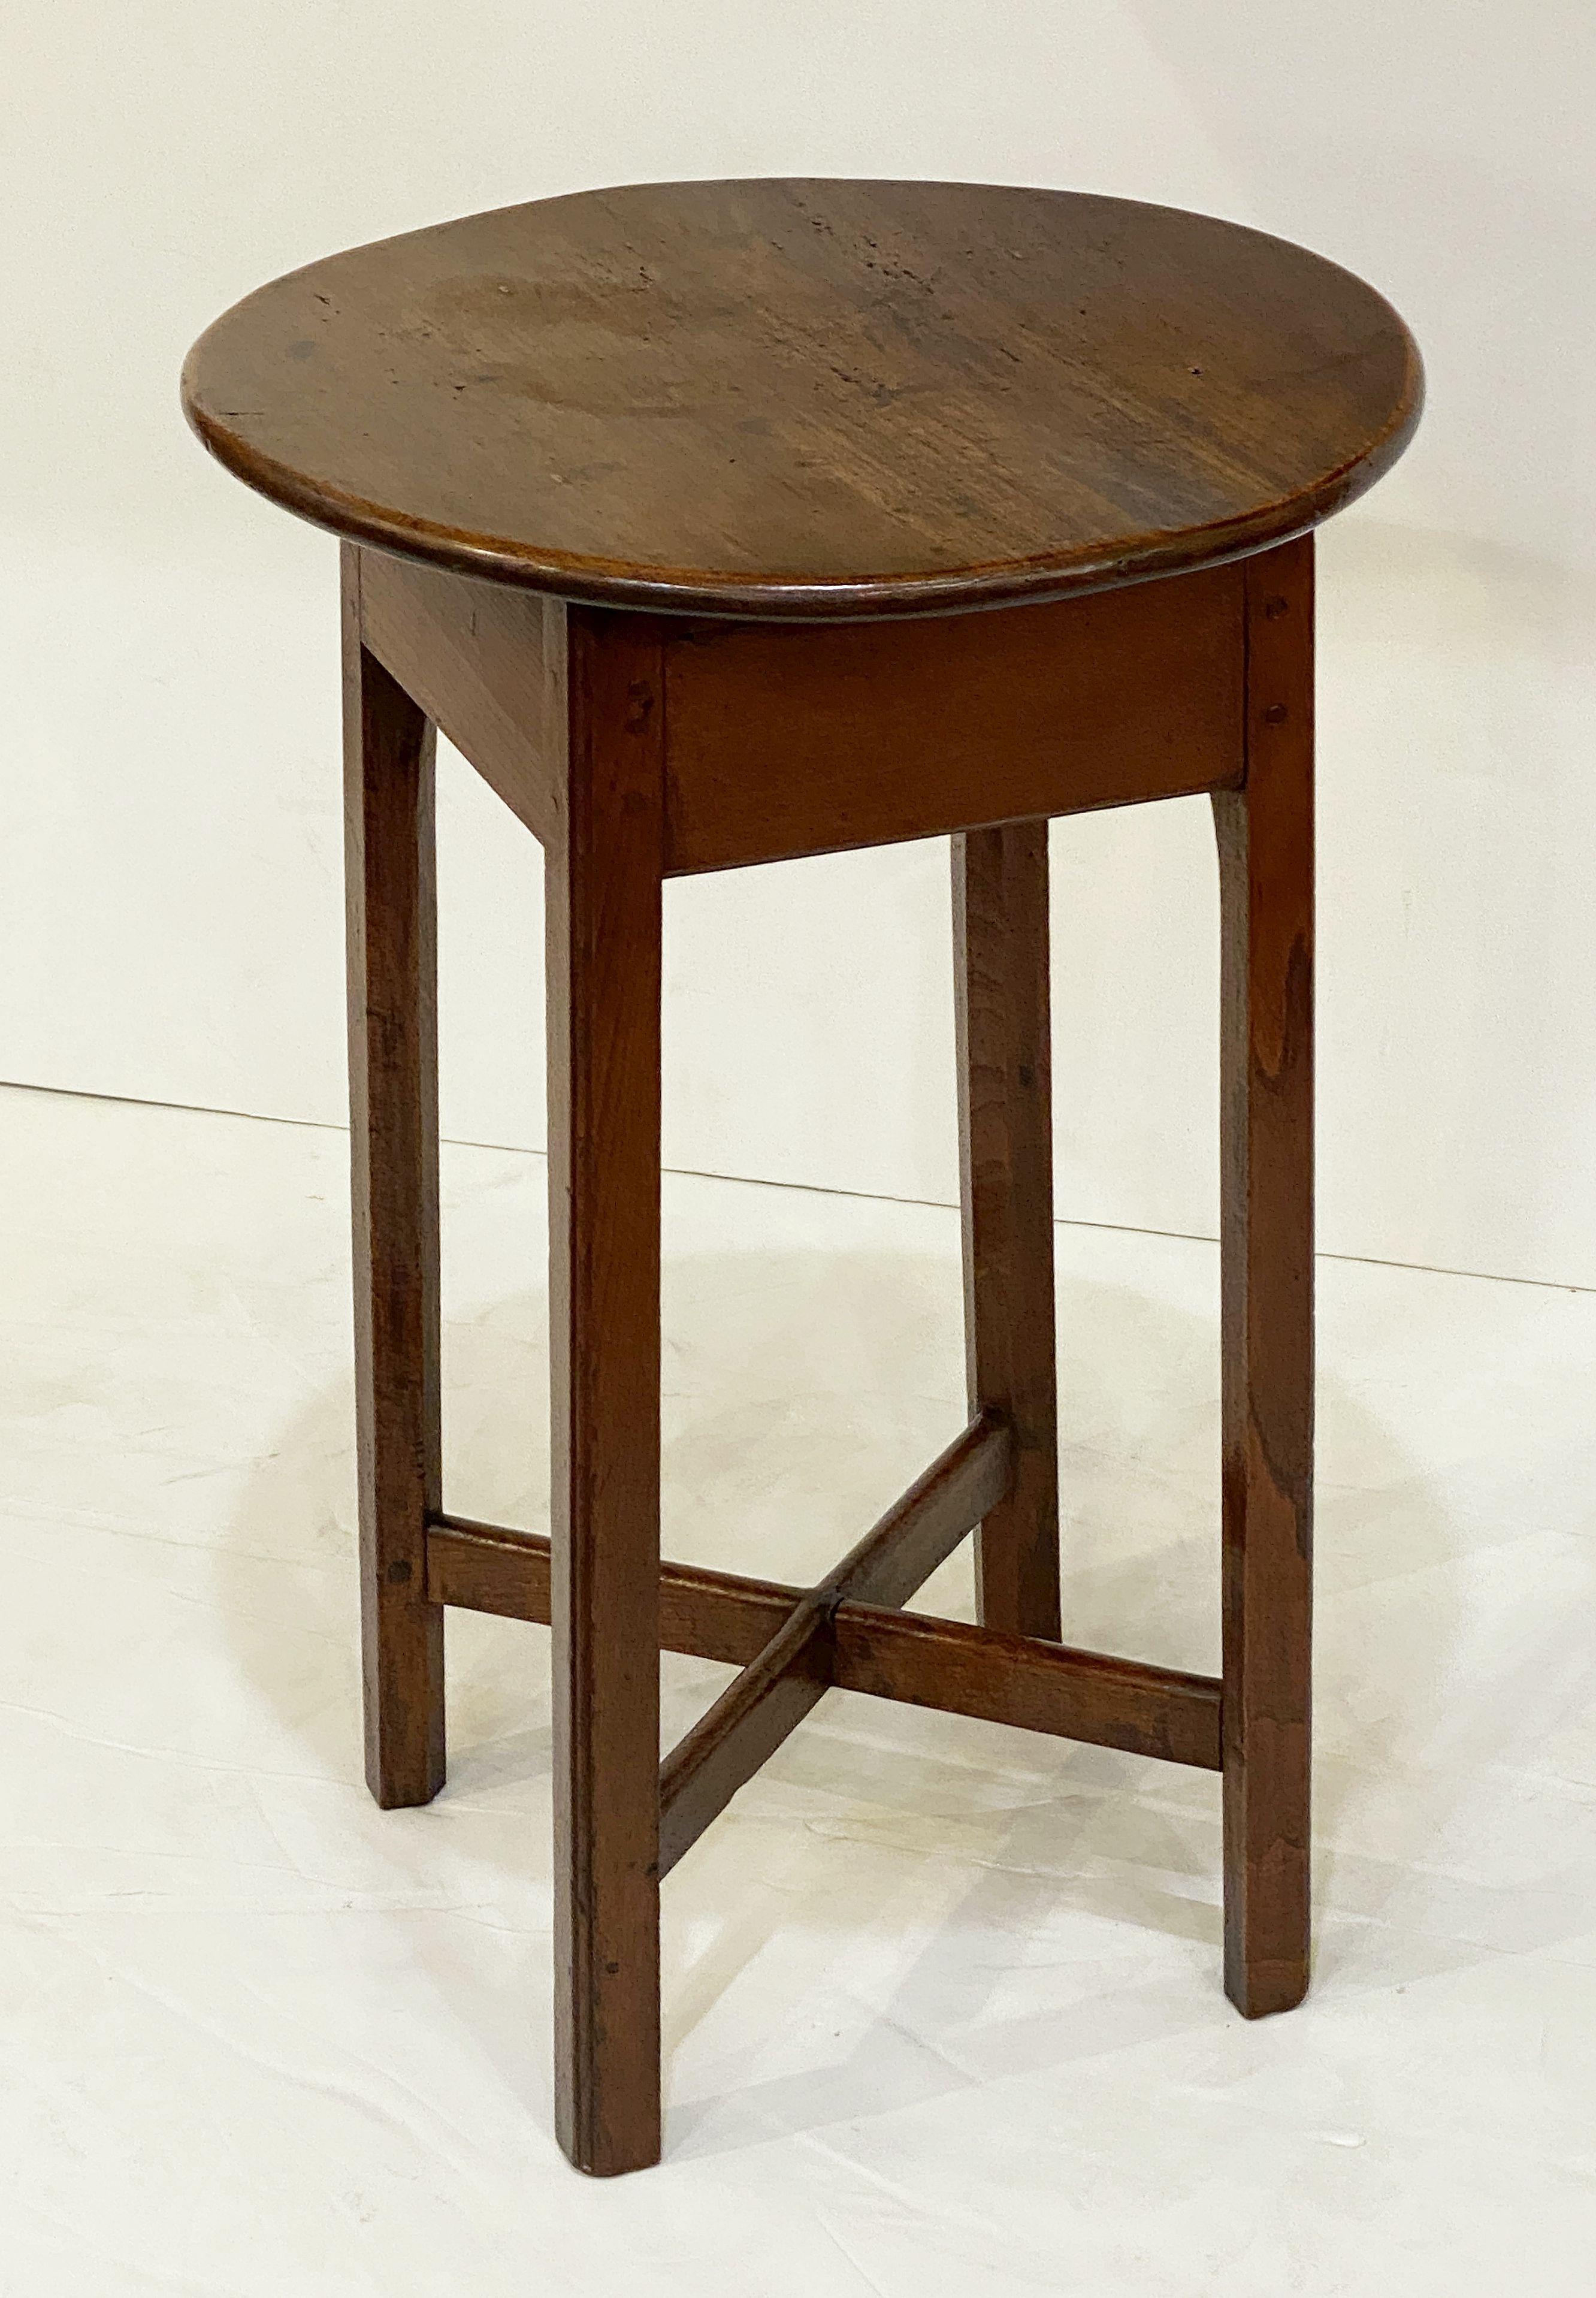 A fine small English cricket table of patinated oak featuring the traditional round or circular top over a four-sided shaped and pegged rustic frieze with hand-planed four-legged base and cross-brace stretcher.

Makes a nice occasional table or side